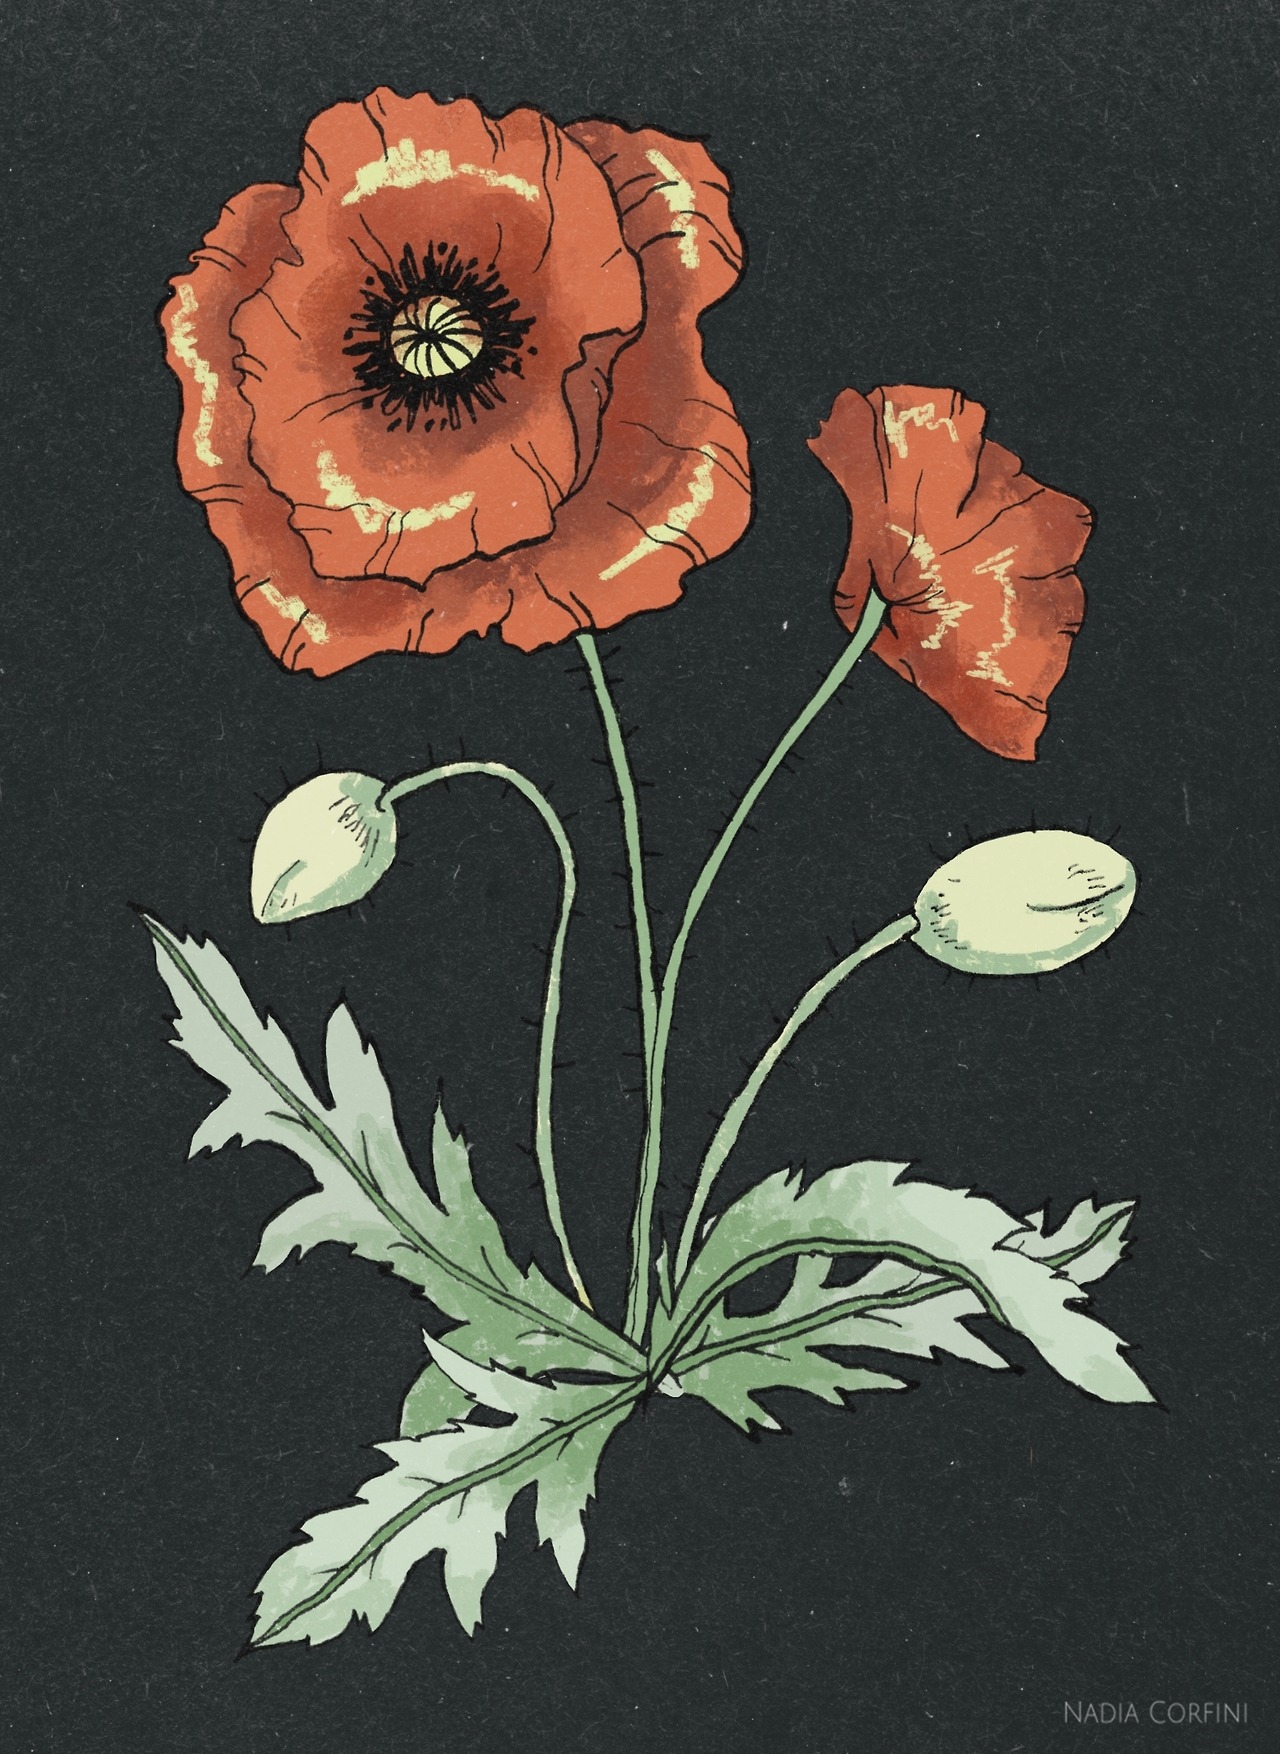 Poppy Flower - by Nadia Corfini Tumblr | Instagram | Etsy — Immediately post your art to a topic and get feedback. Join our new community, EatSleepDraw Studio, today!